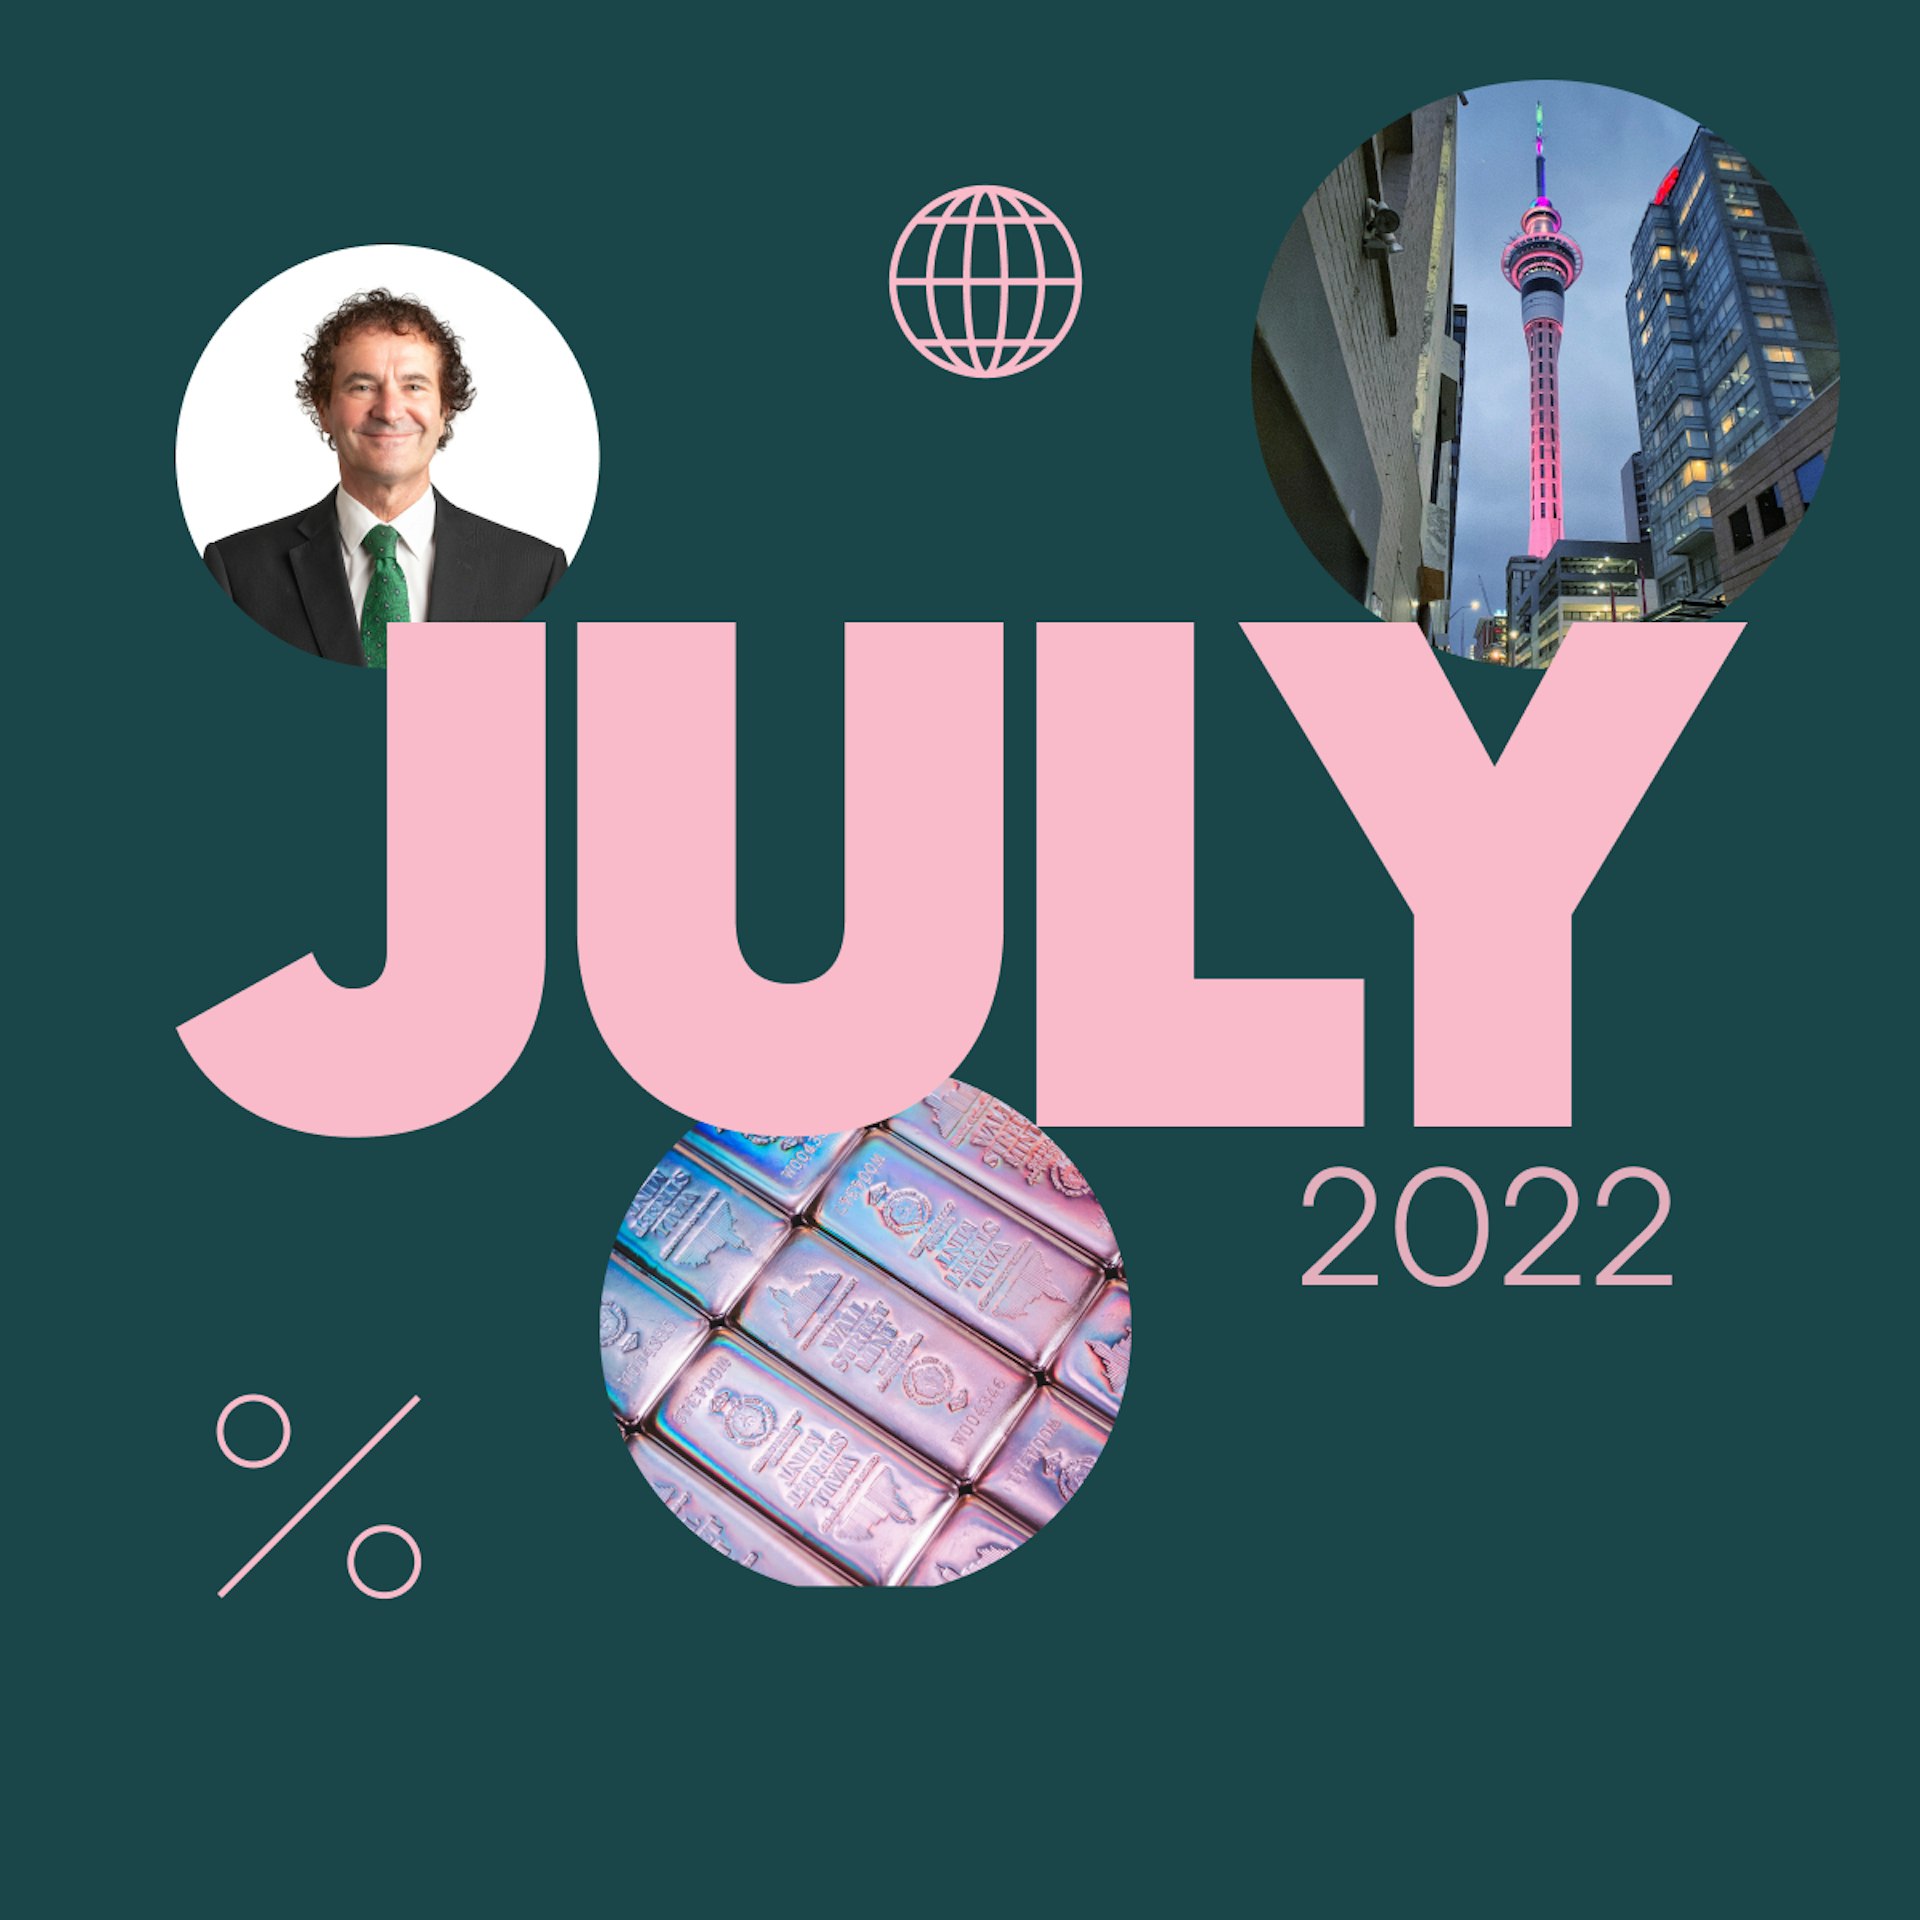 Hero image for Investor Insights with Tony Alexander. The word July is centre in big pink lettering, with images of Tony himself, the Sky tower, and metal bullions surrounding.  